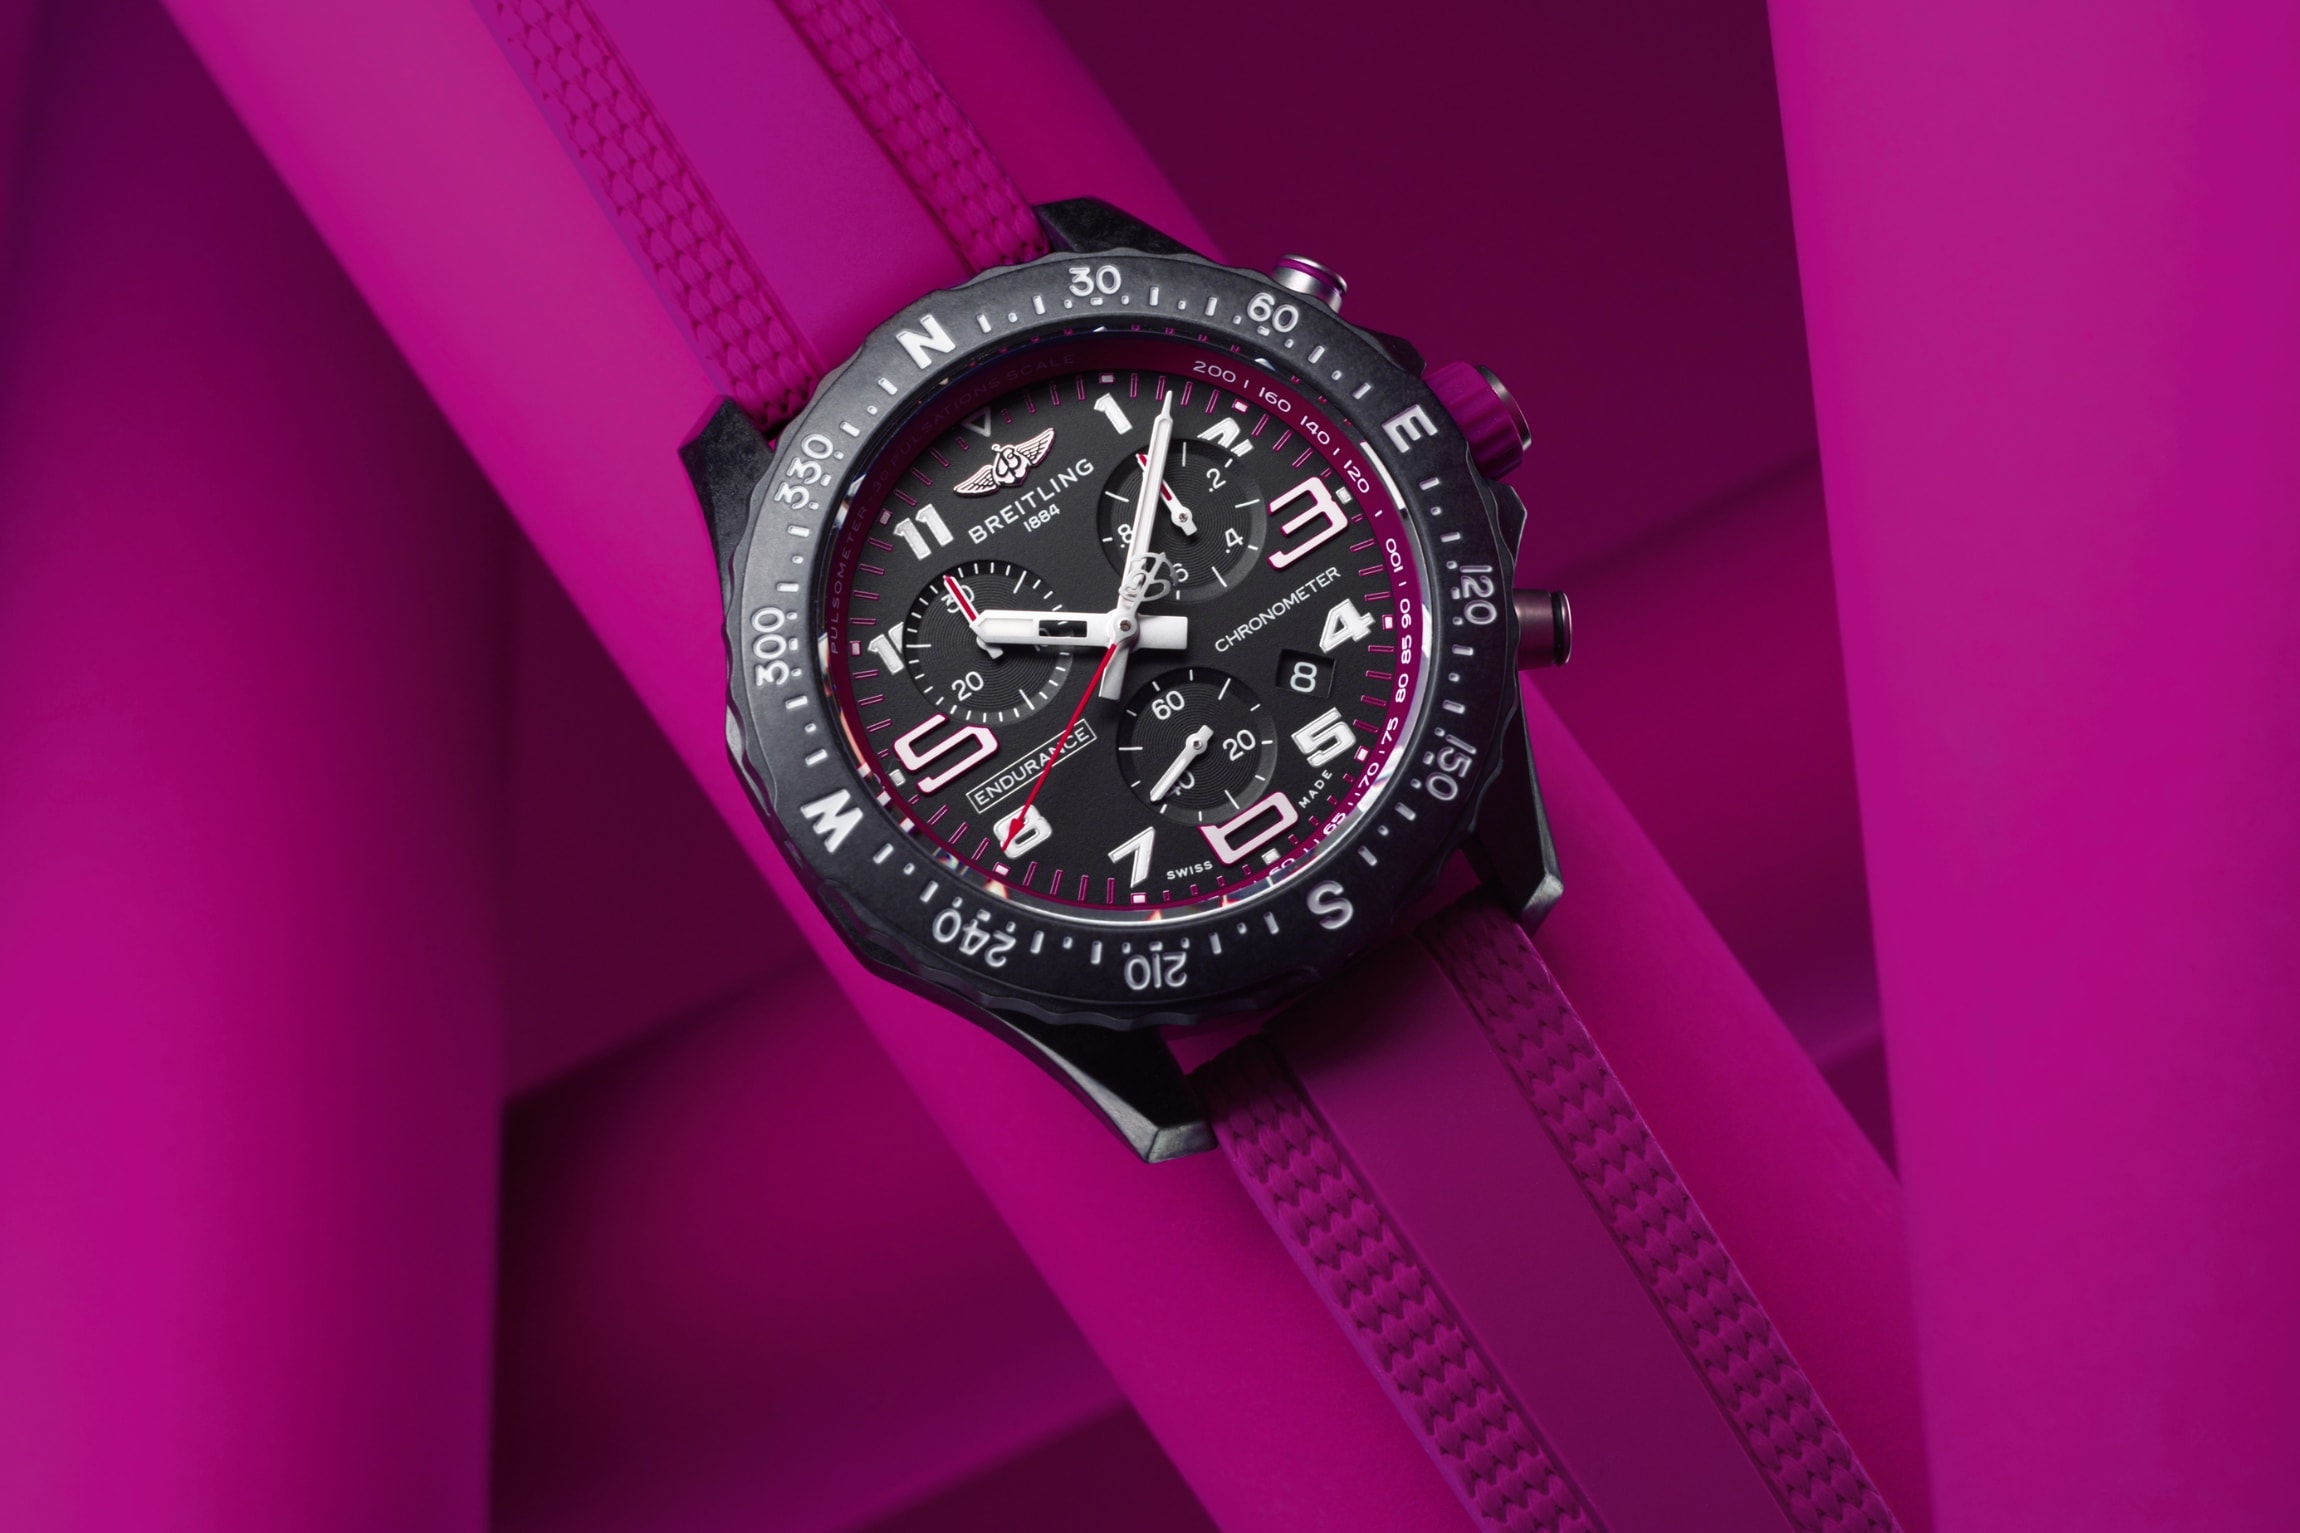 Introducing Breitling Endurance Pro 38